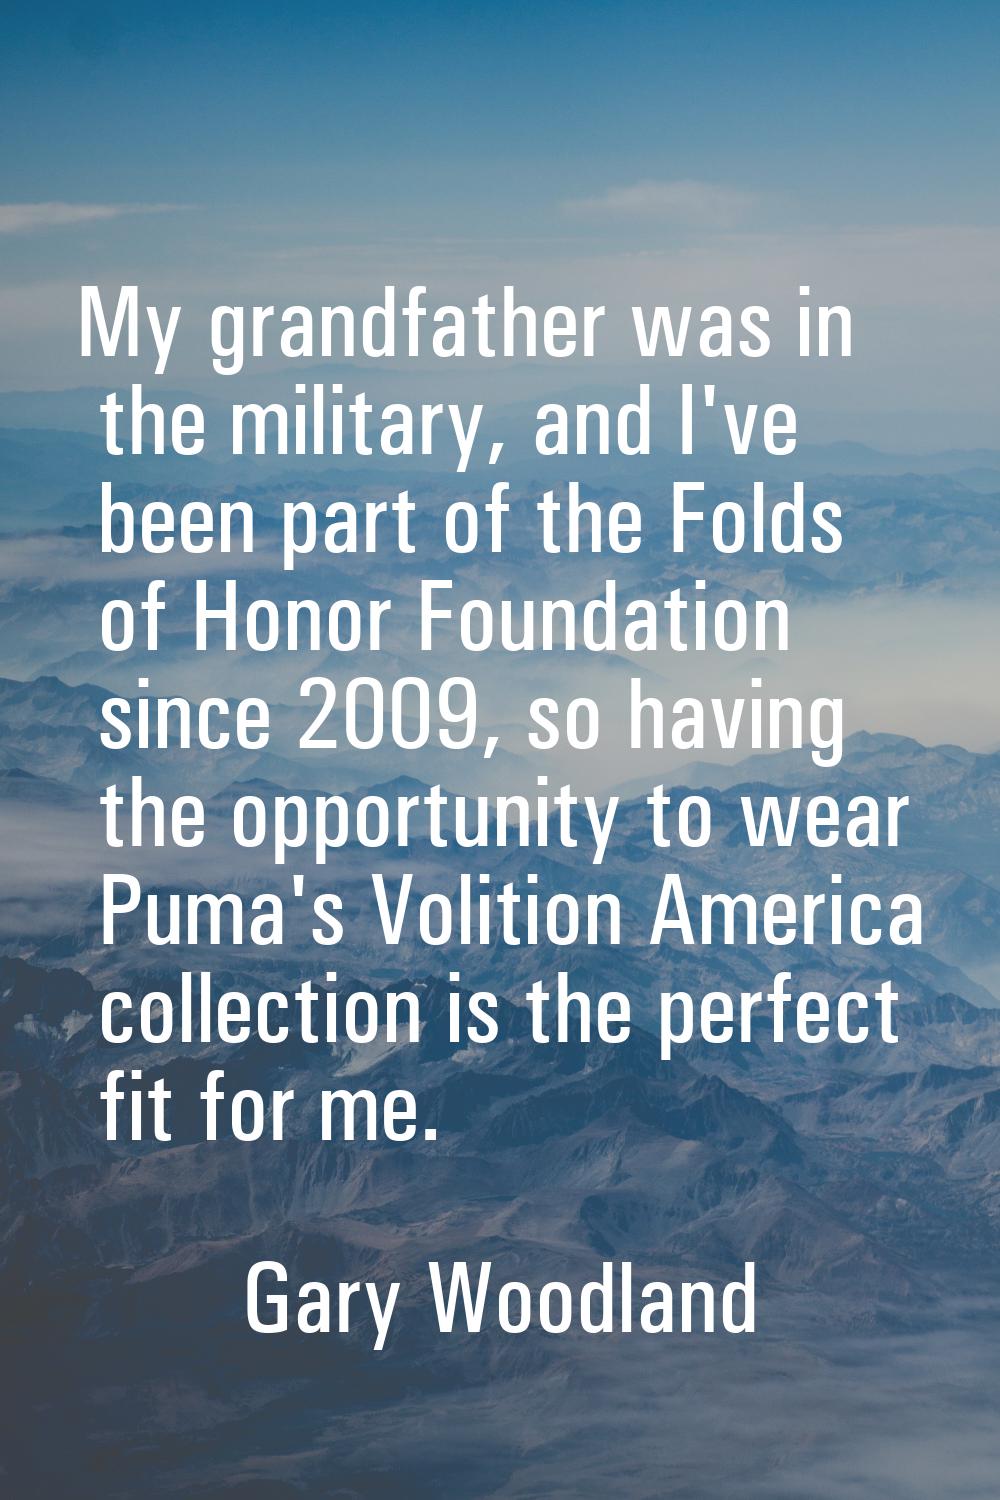 My grandfather was in the military, and I've been part of the Folds of Honor Foundation since 2009,